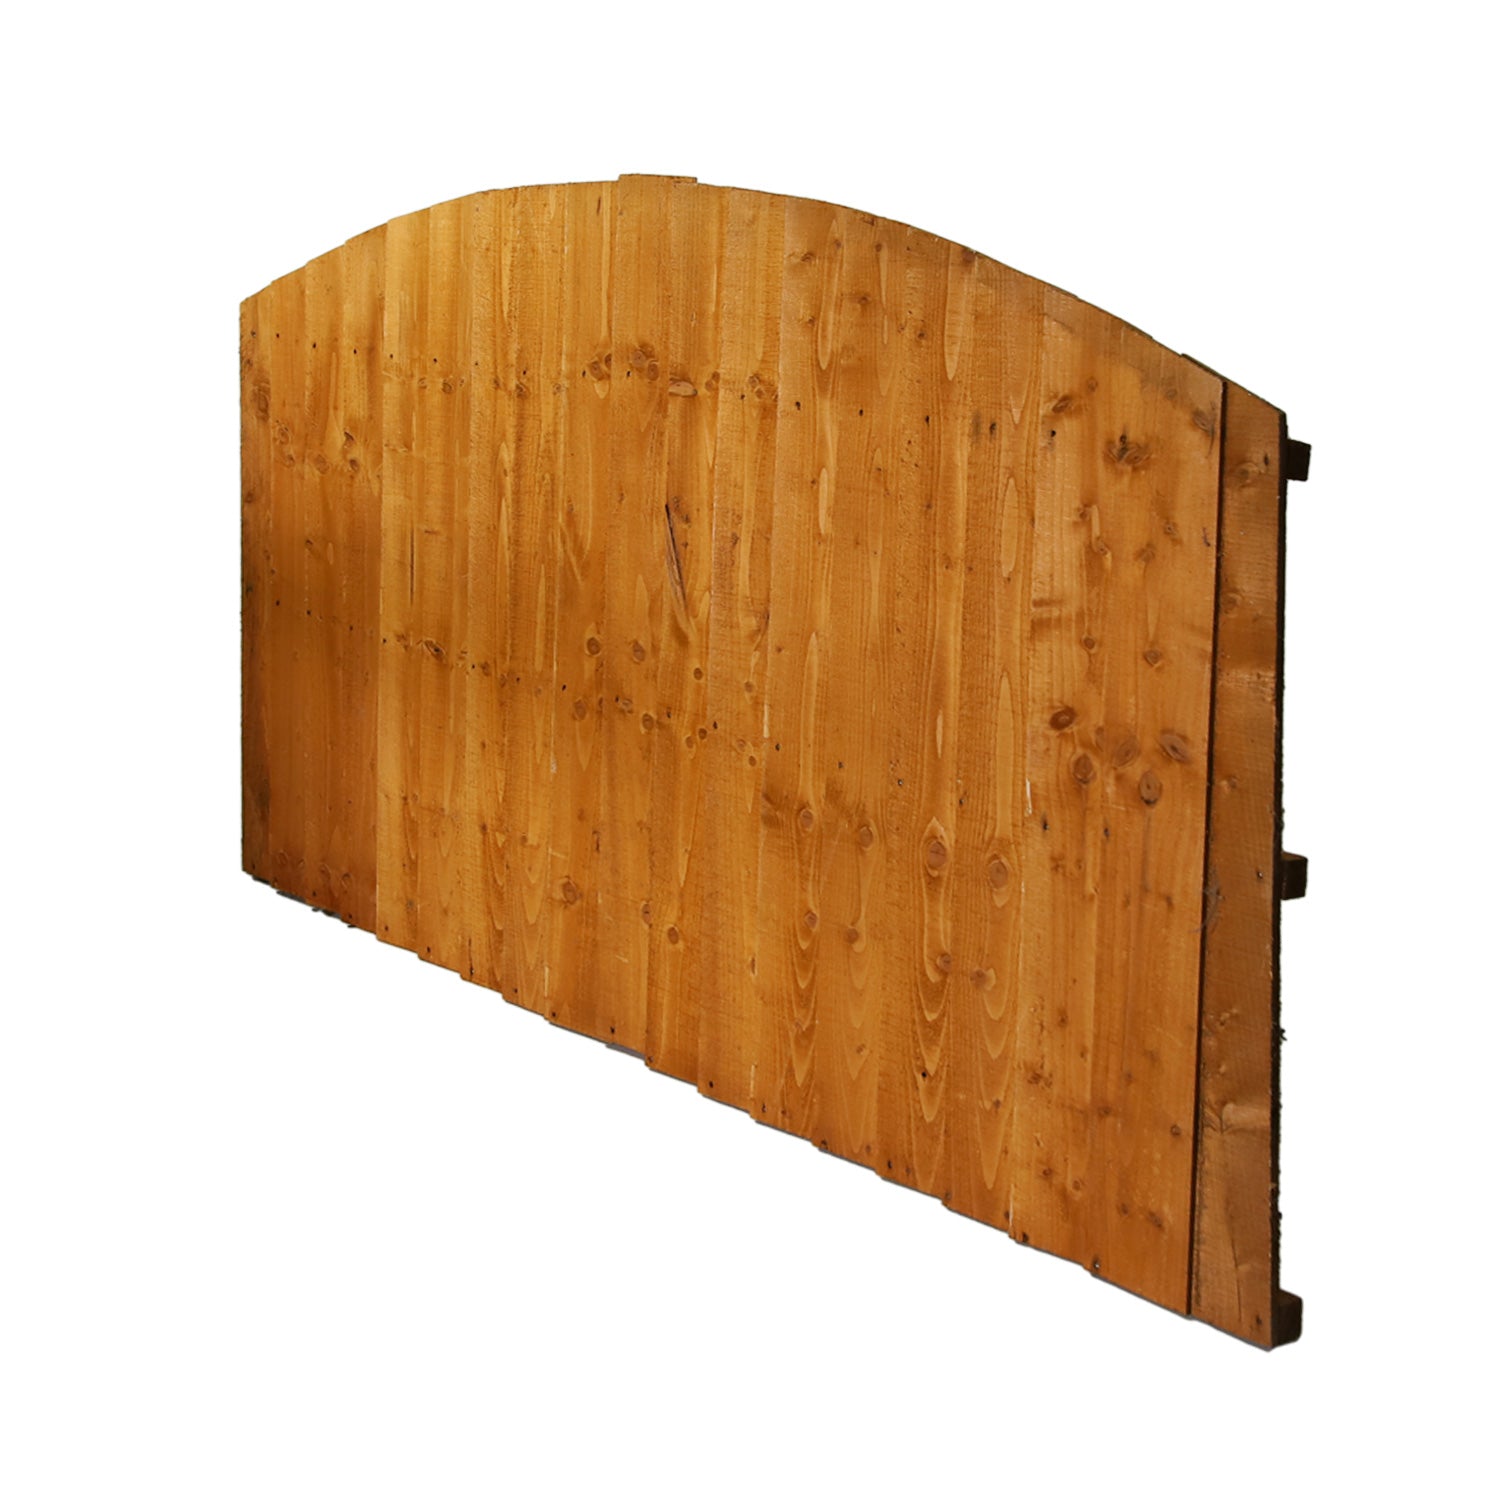 6' x 3' + Dome Featheredge Fence Panel